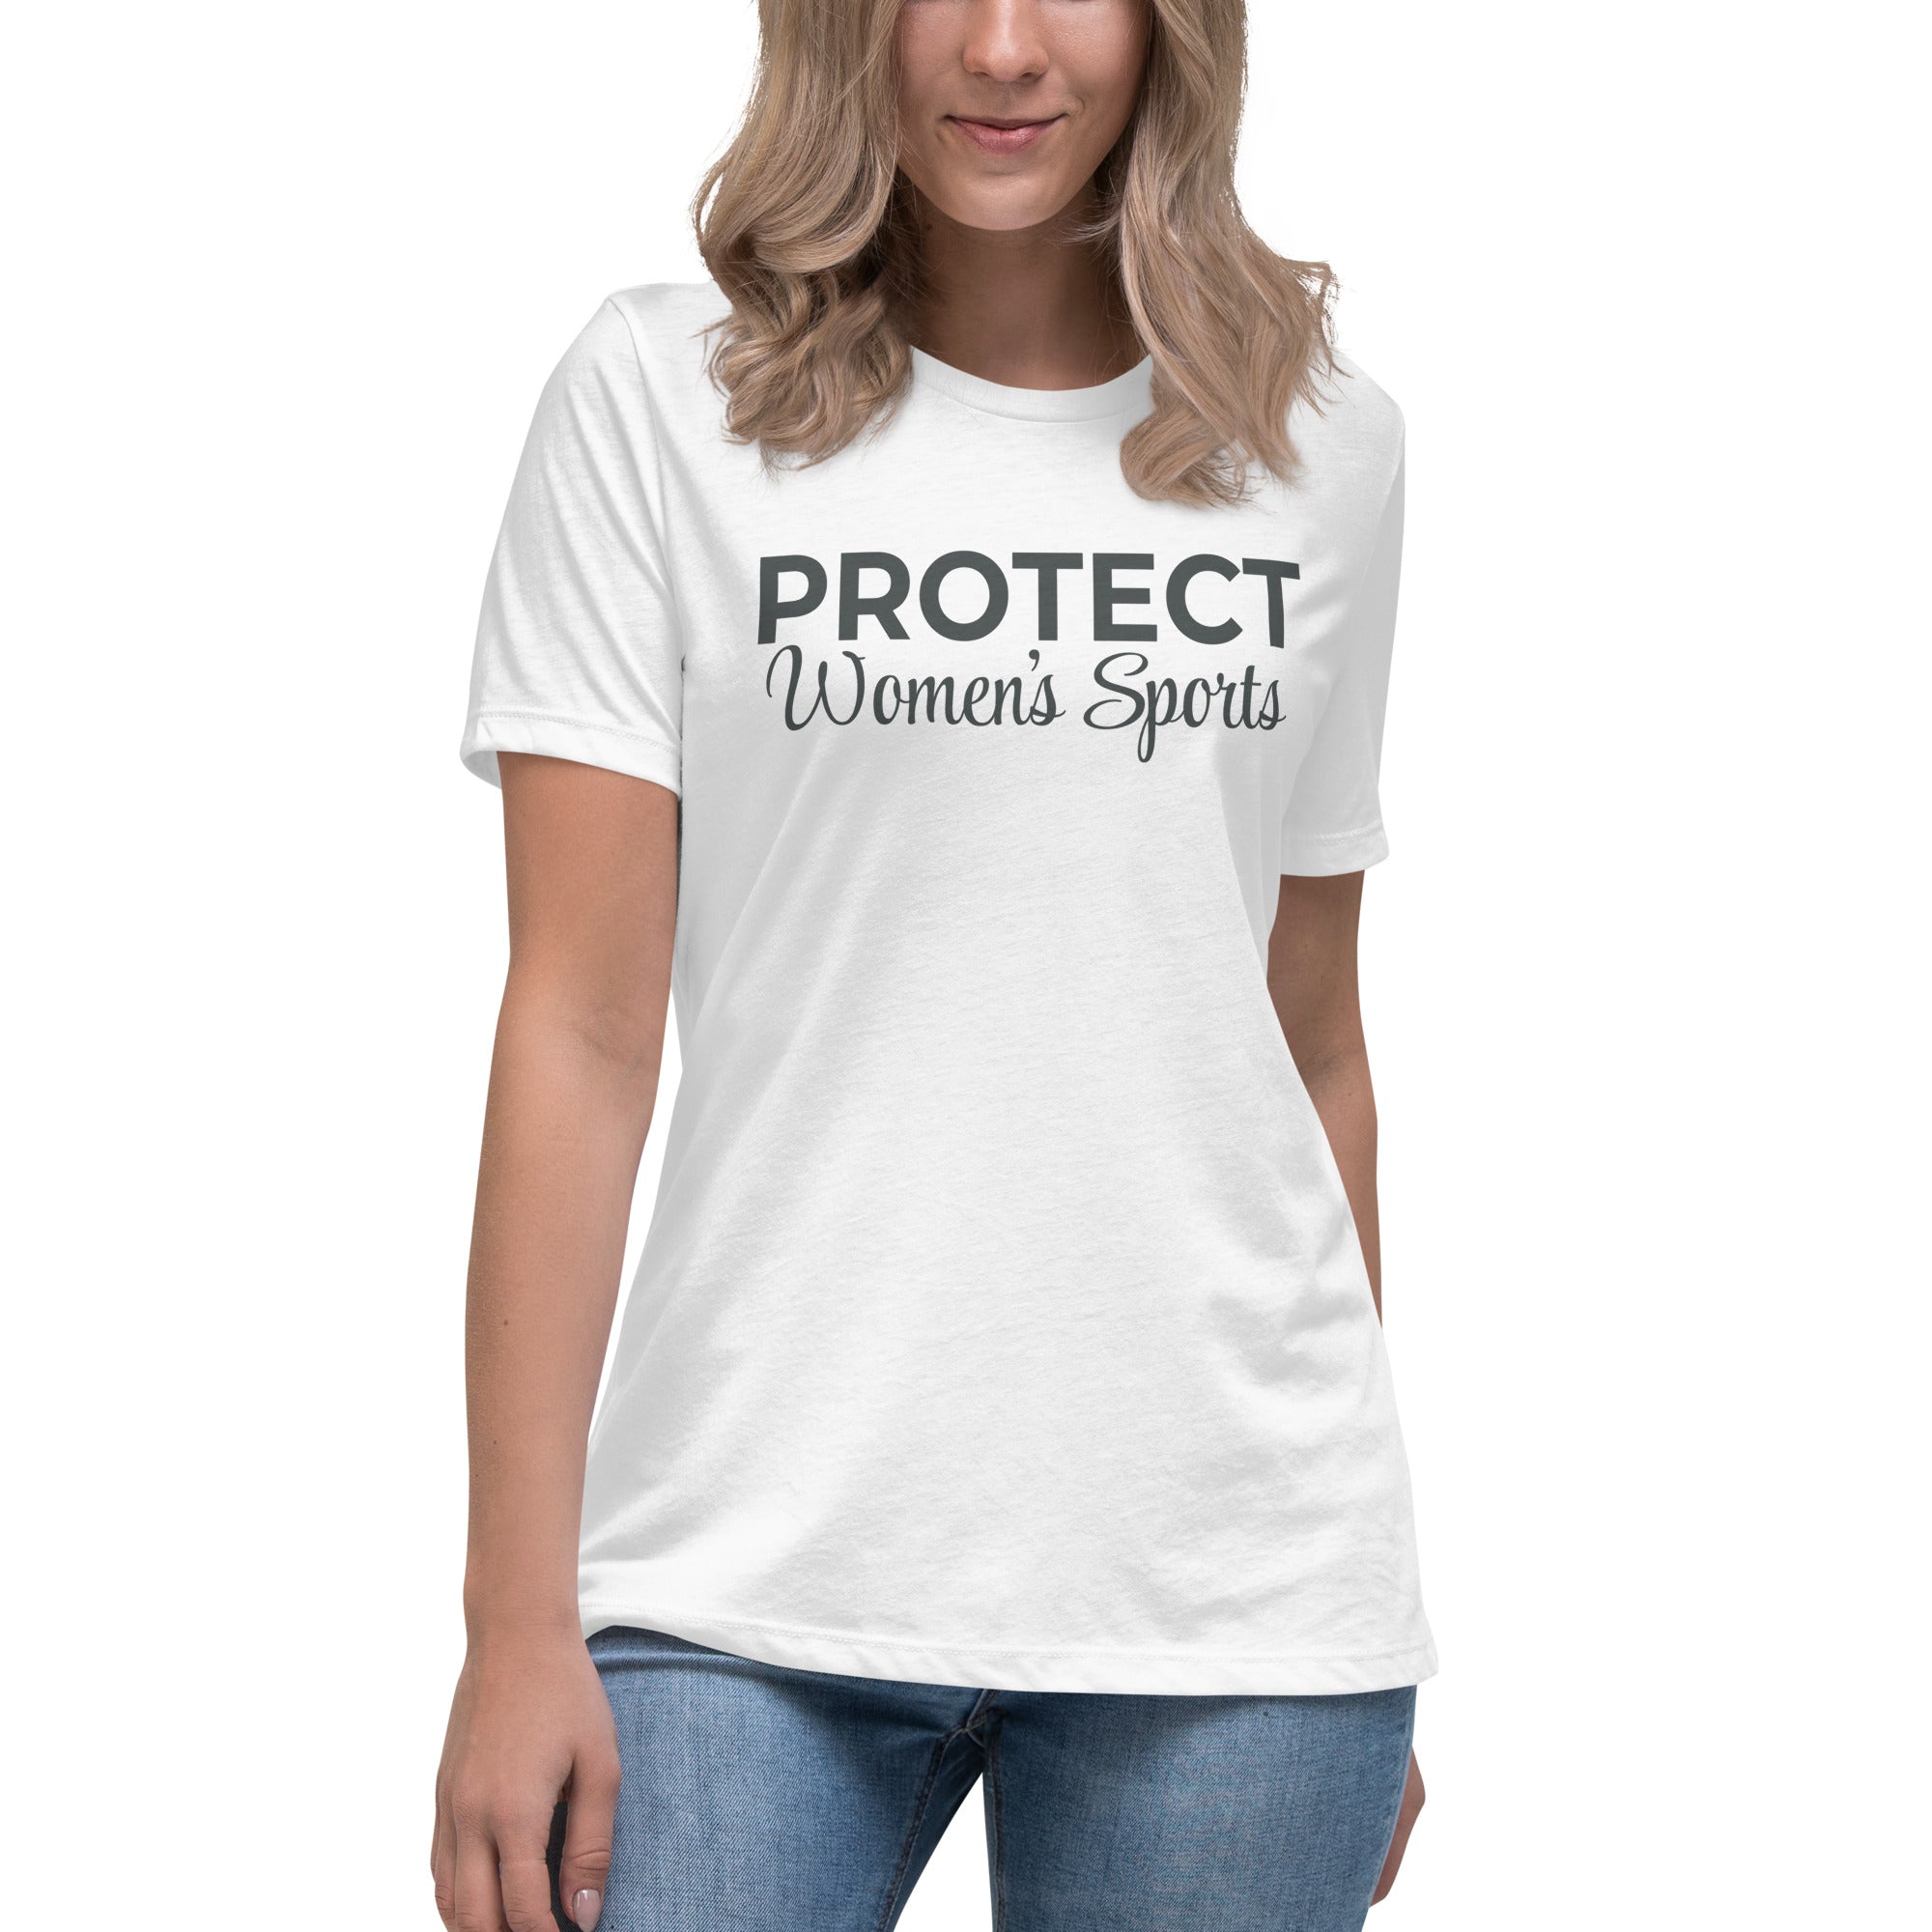 Support Women's Sports - Protect Women's Sports T-Shirt | Shop For Your Passions